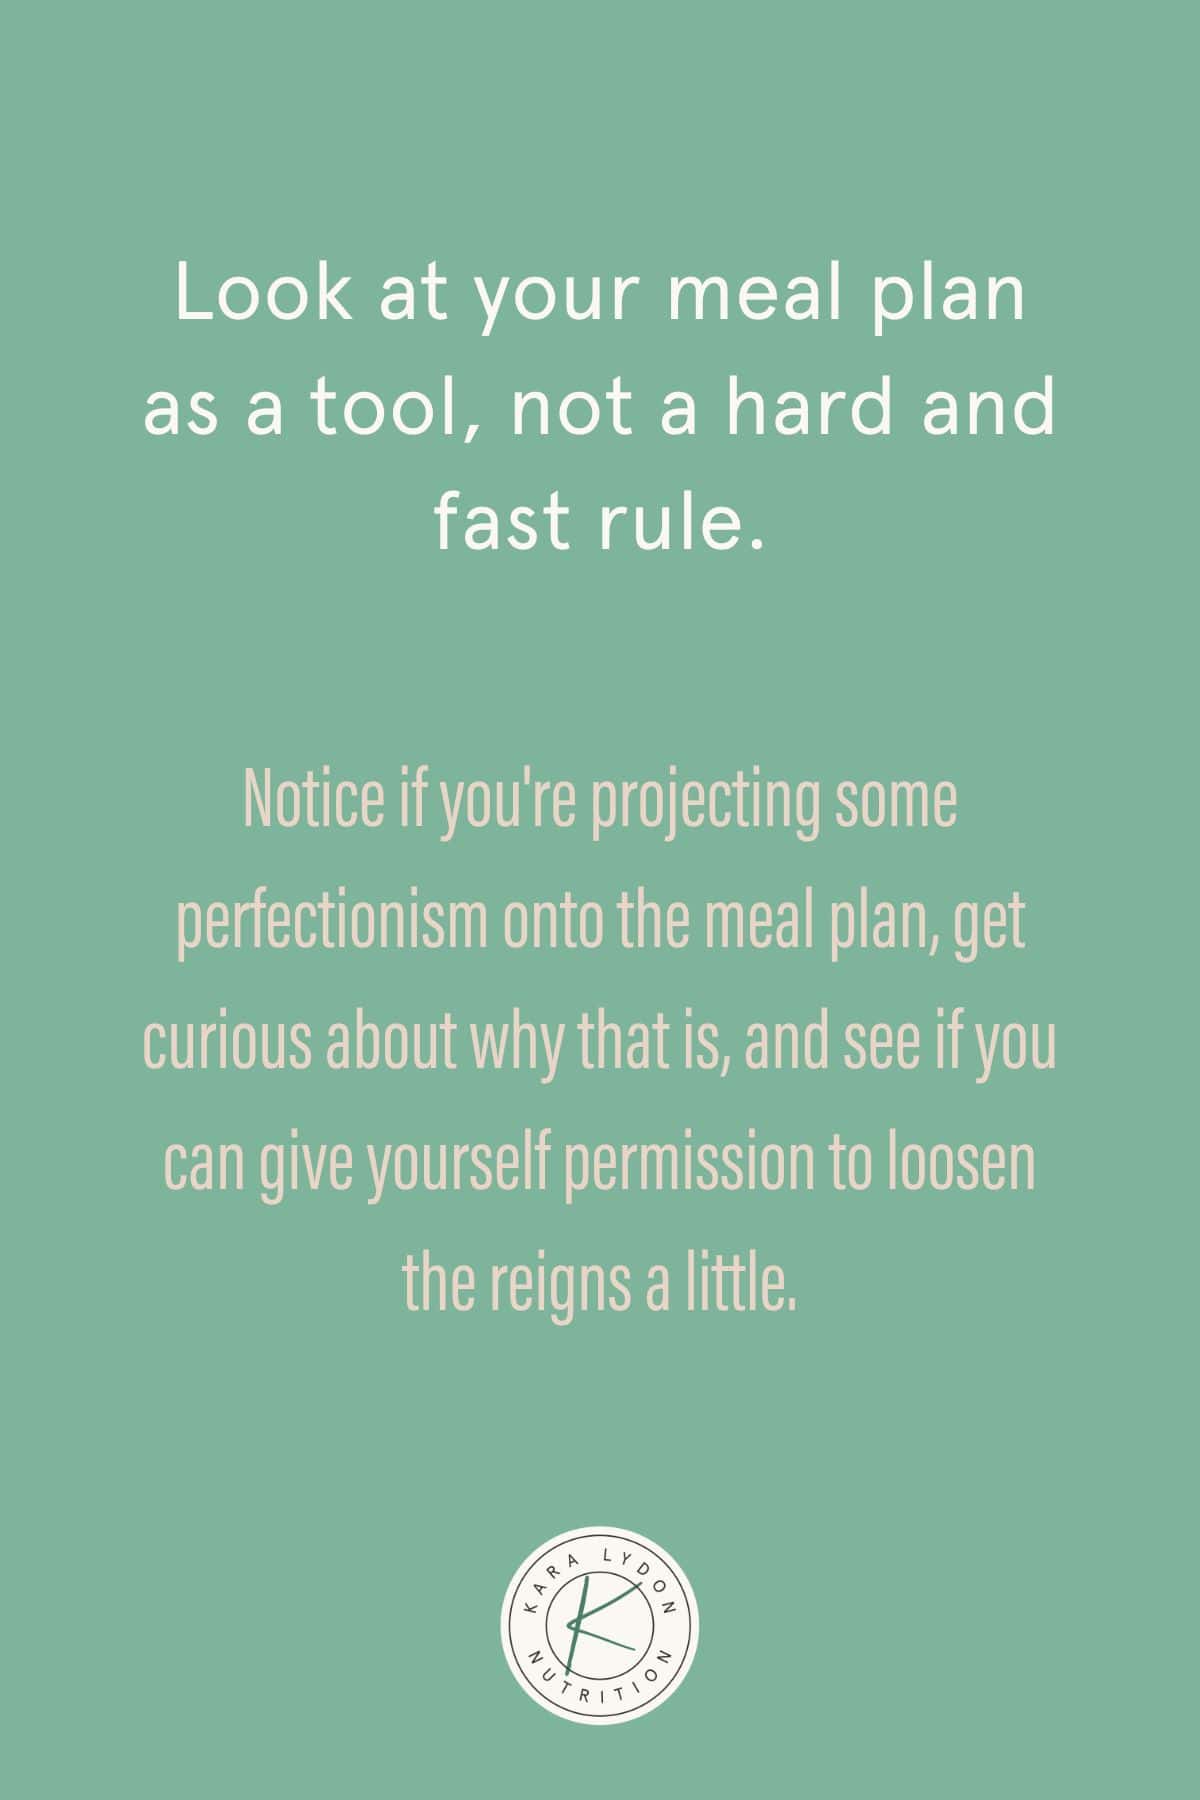 Graphic with quote: "Look at your meal plan as a tool, not a hard and fast rule. Notice if you're projecting some perfectionism onto the meal plan, get curious about why that is, and see if you can give yourself permission to loosen the reigns a little."